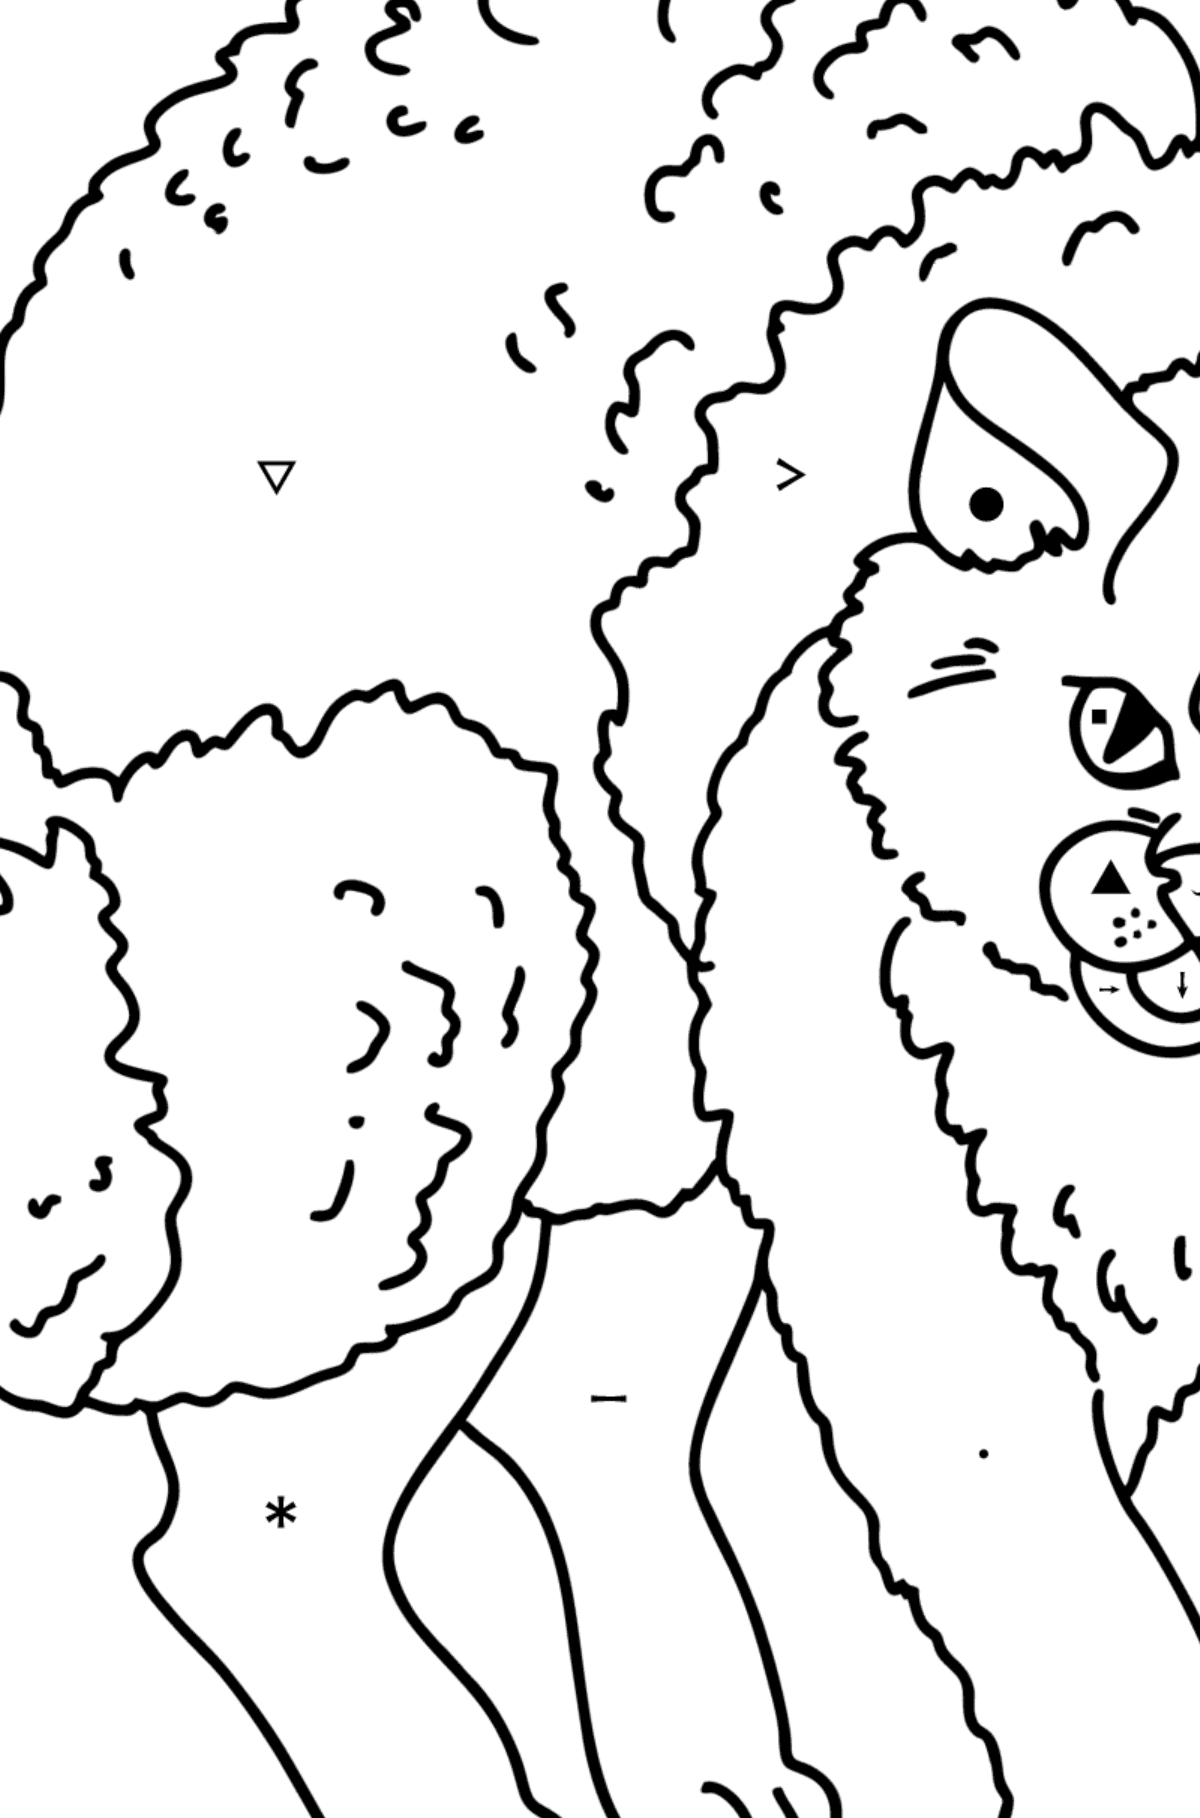 Grumpy Cat coloring page - Coloring by Symbols for Kids